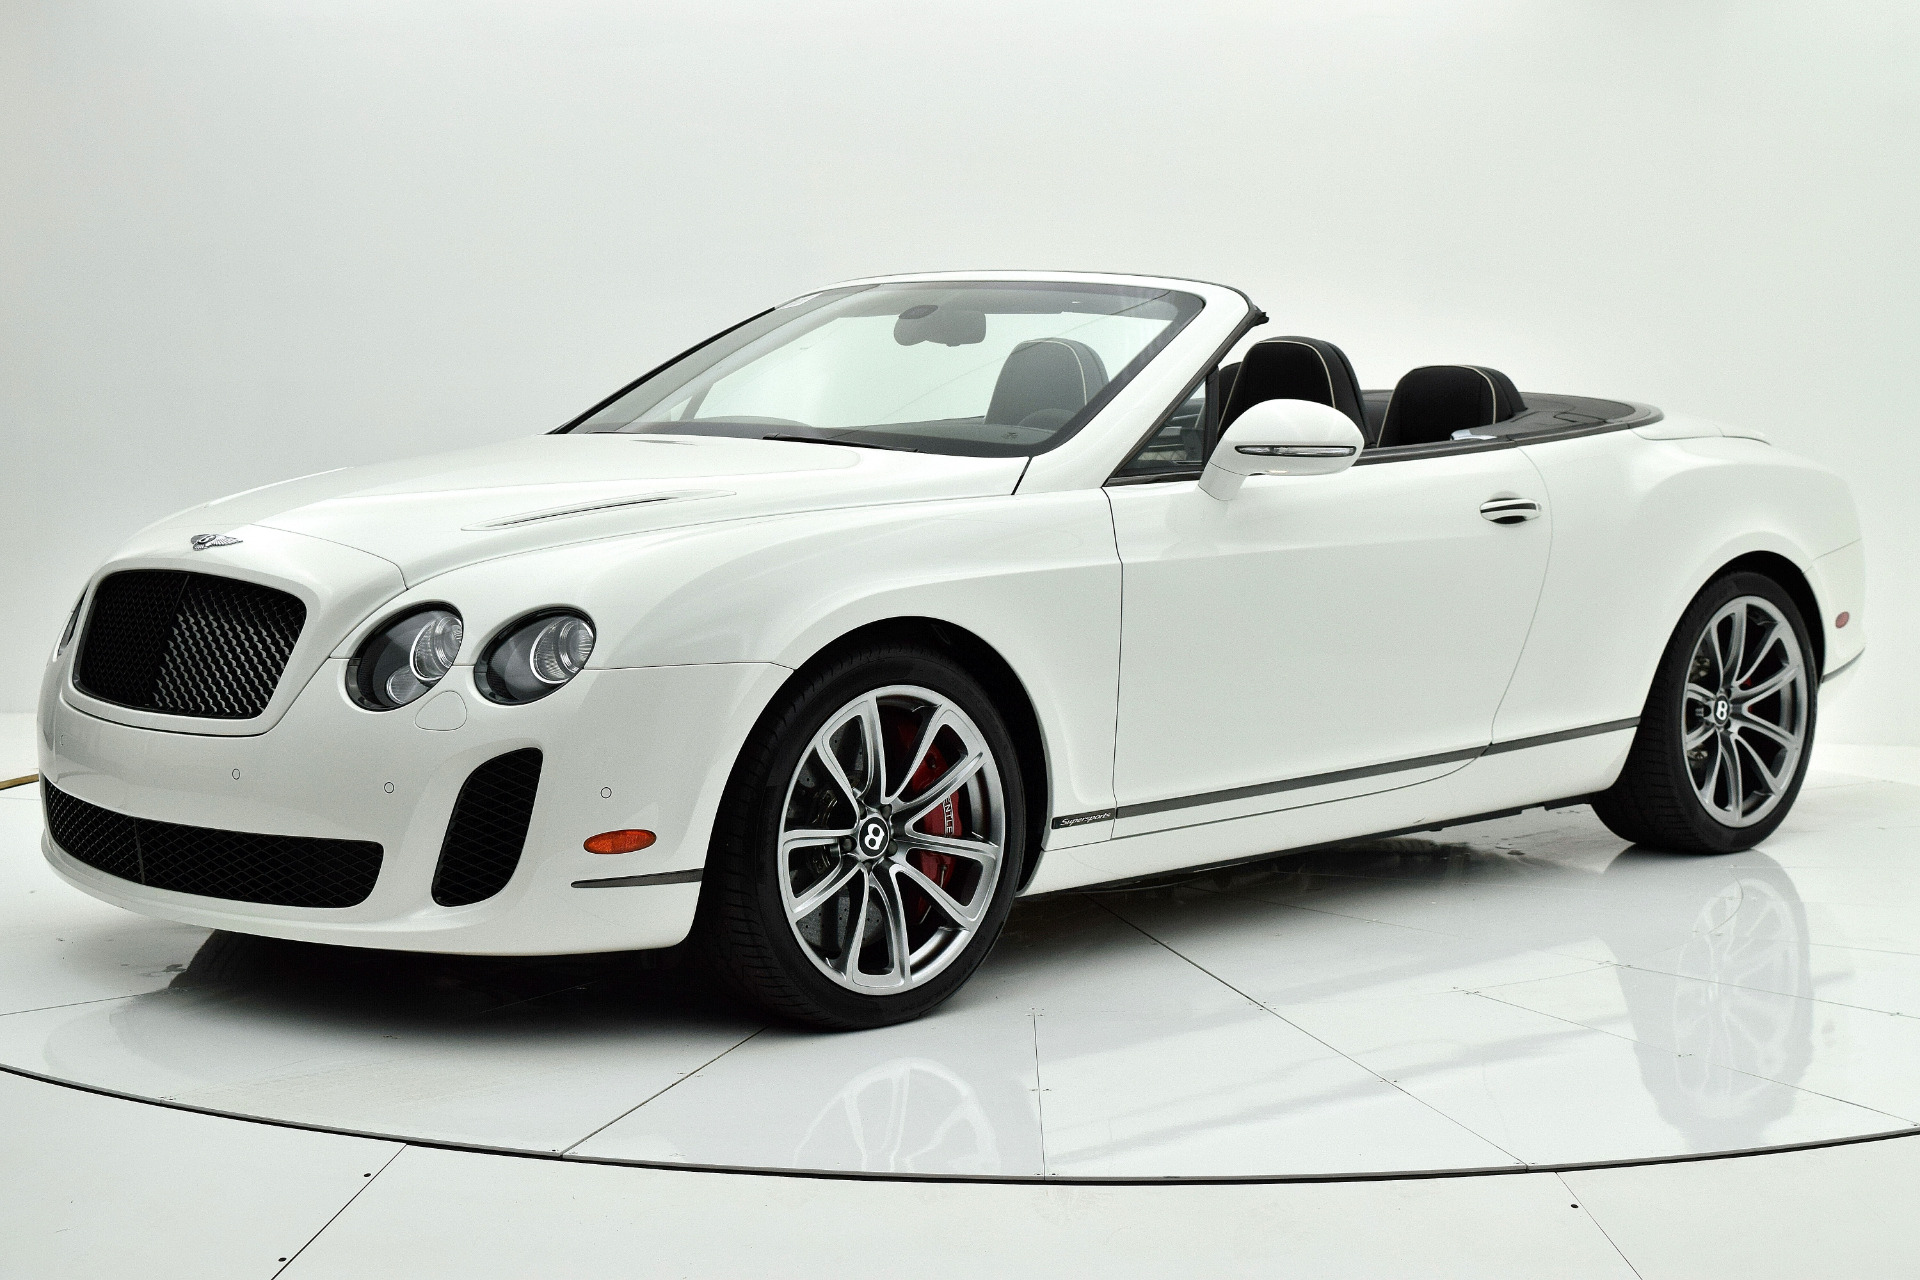 Used 2012 Bentley Continental Supersports Supersports for sale Sold at Bentley Palmyra N.J. in Palmyra NJ 08065 2